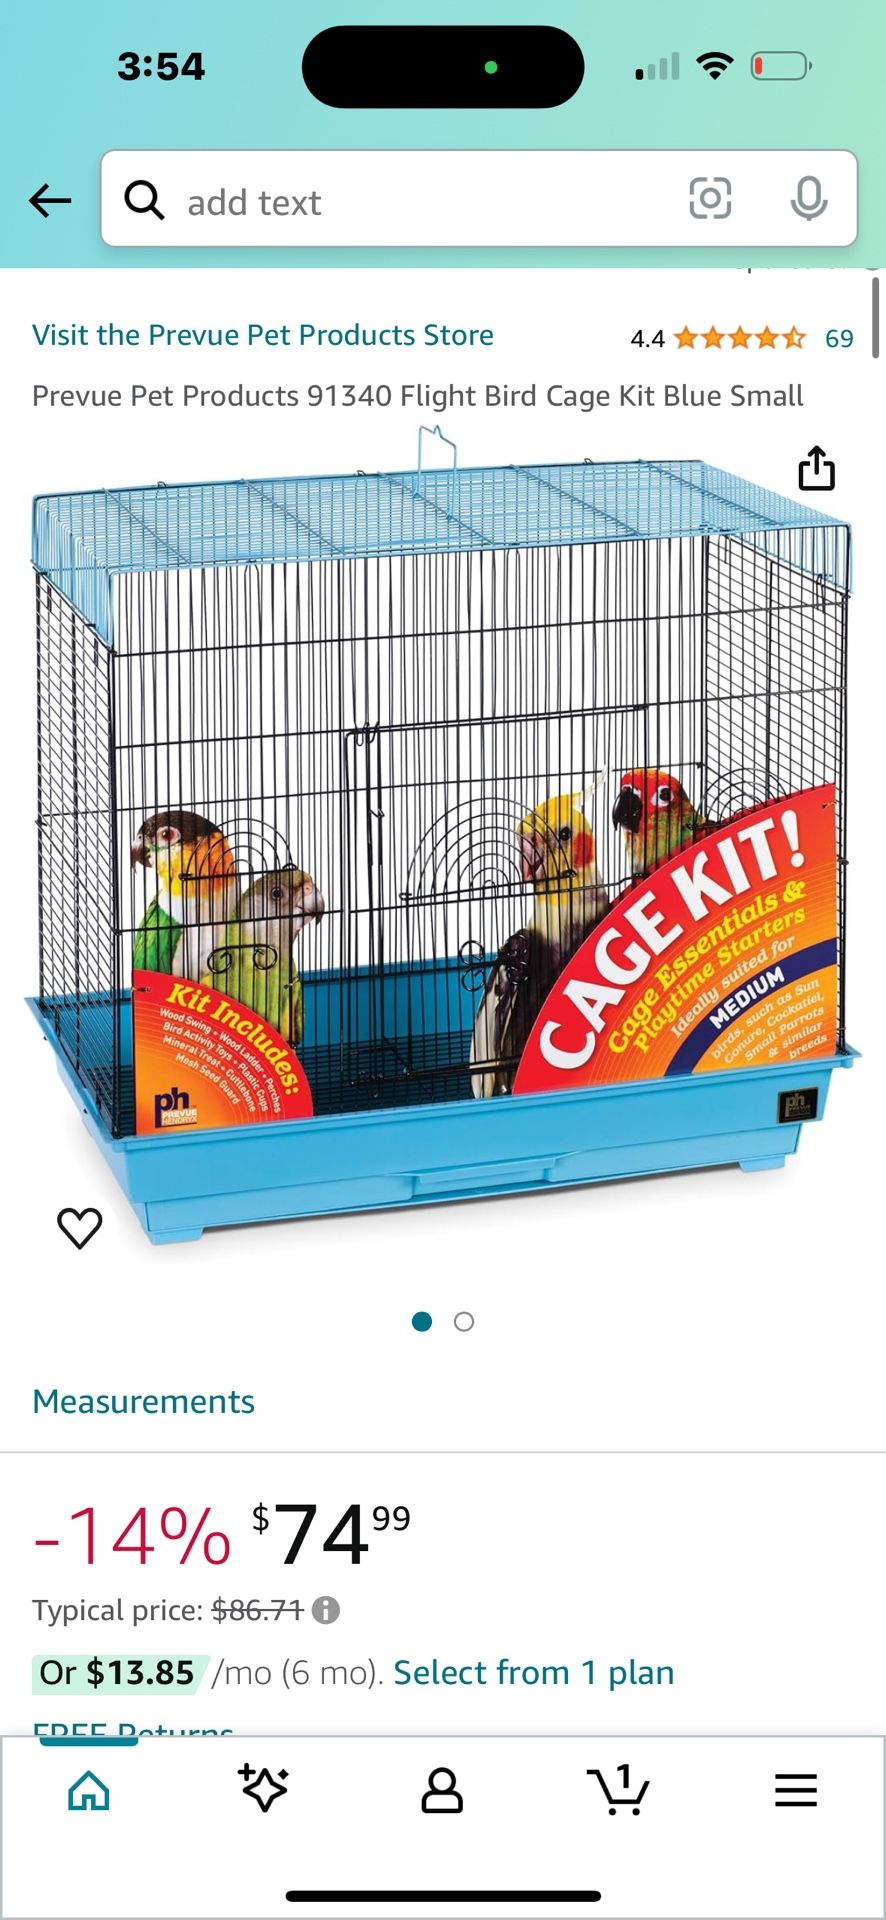 Prevue Pet Products 91340 Flight Bird Cage Kit Blue Small